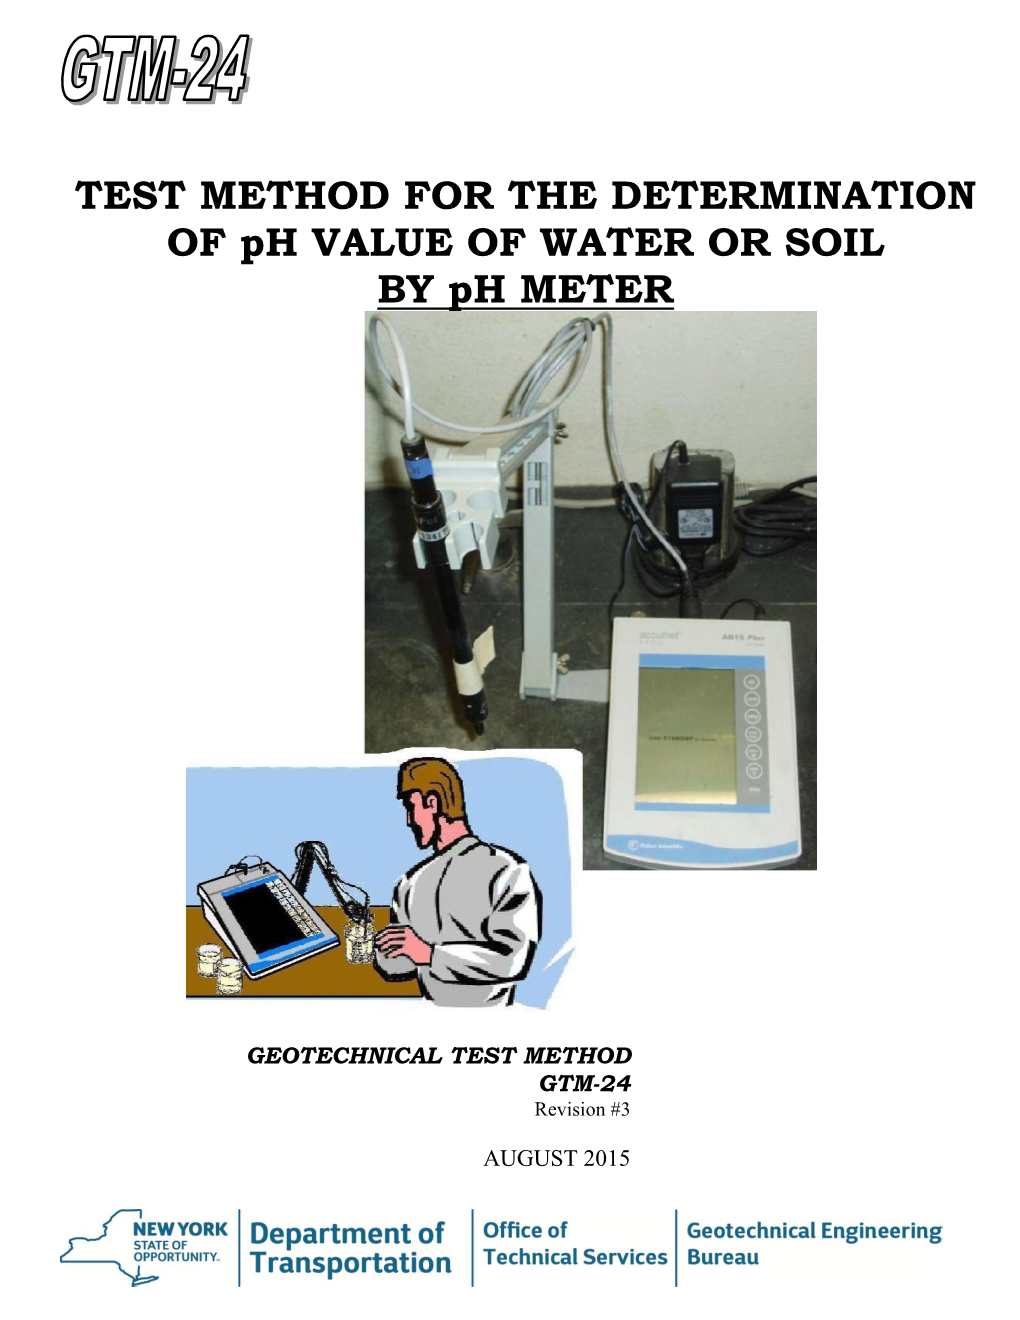 TEST METHOD for the DETERMINATION of Ph VALUE of WATER OR SOIL by Ph METER